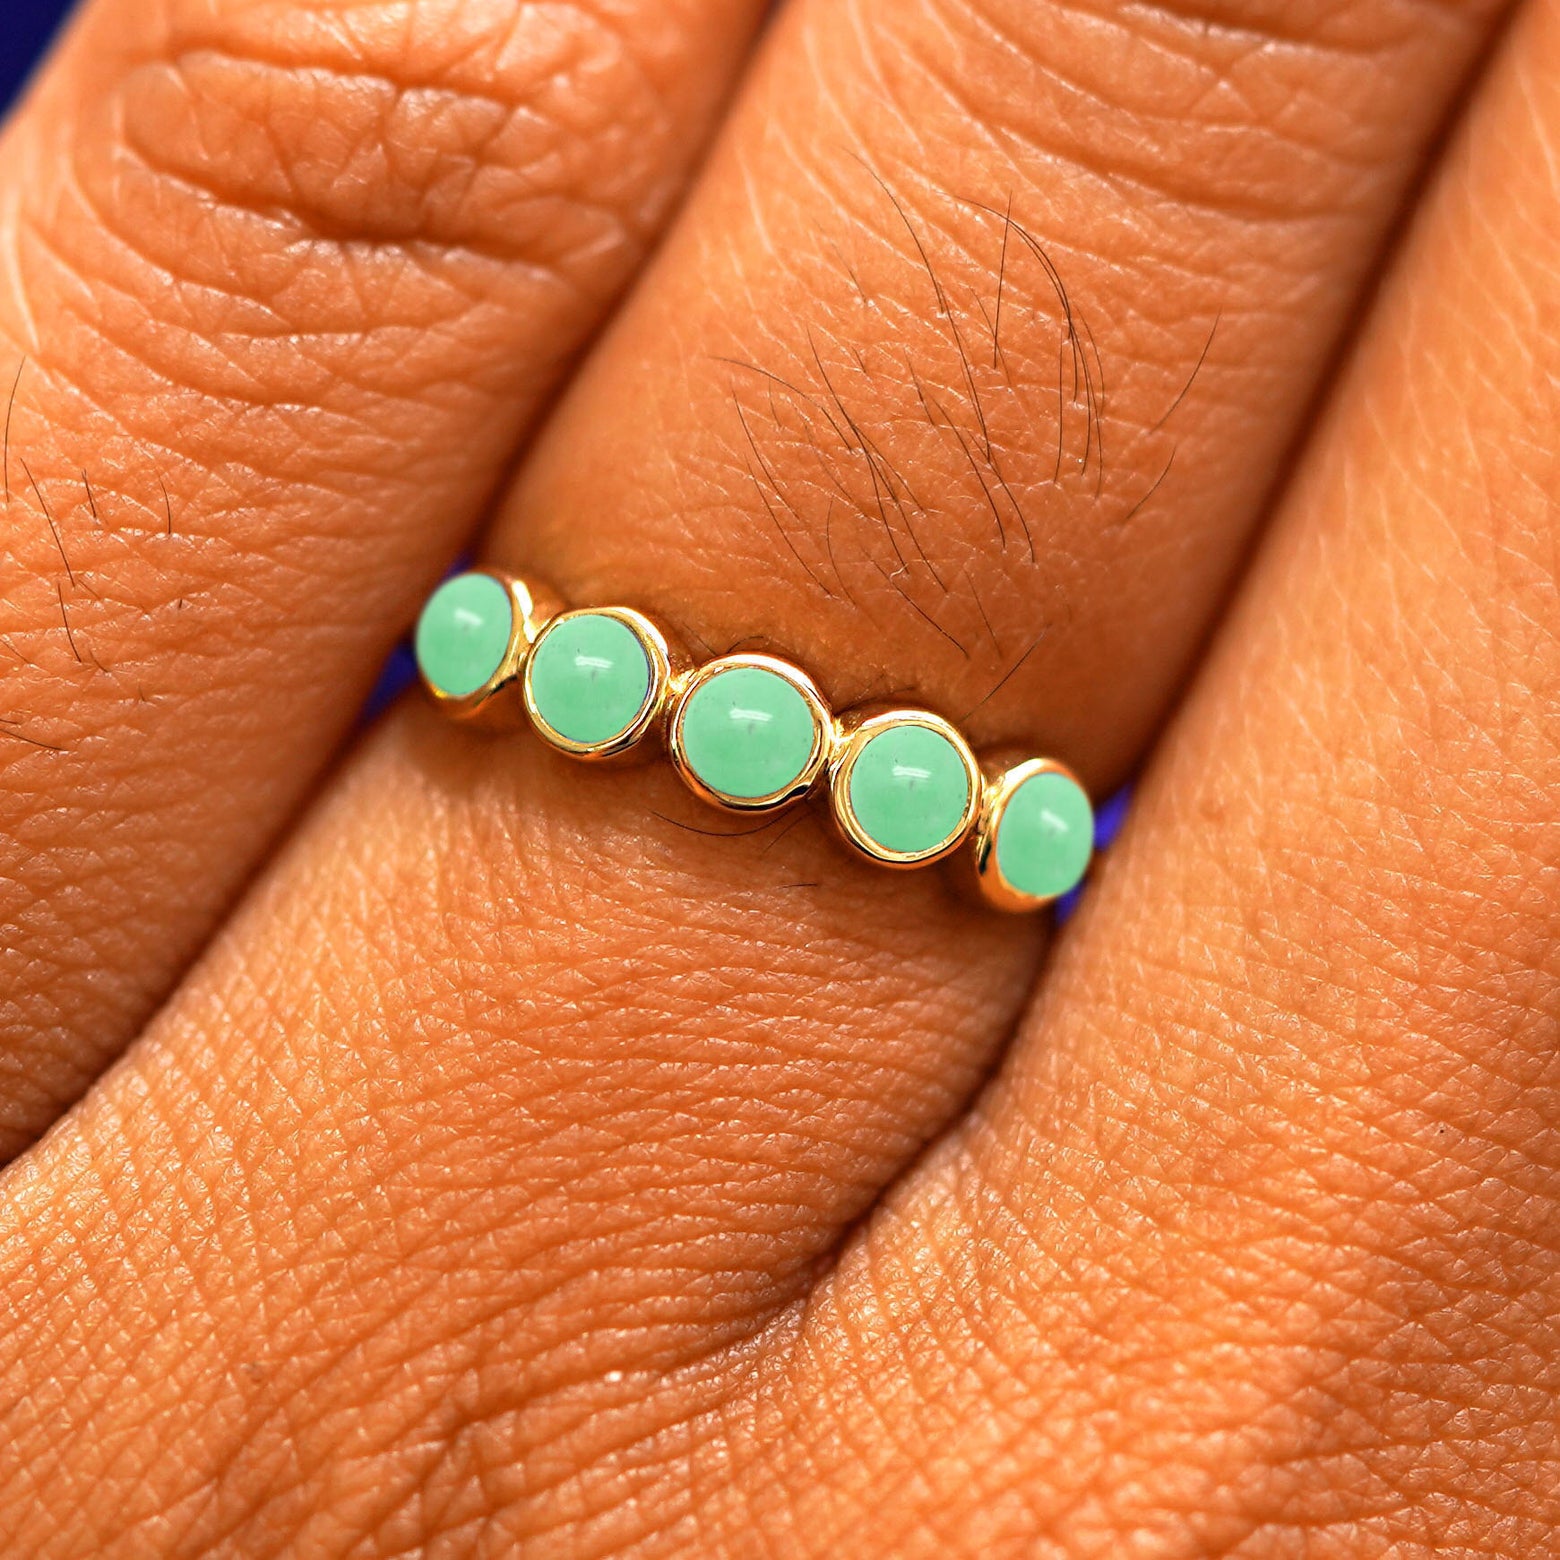 Close up view of a model's hand wearing a yellow gold 5 Gemstones Ring in jade